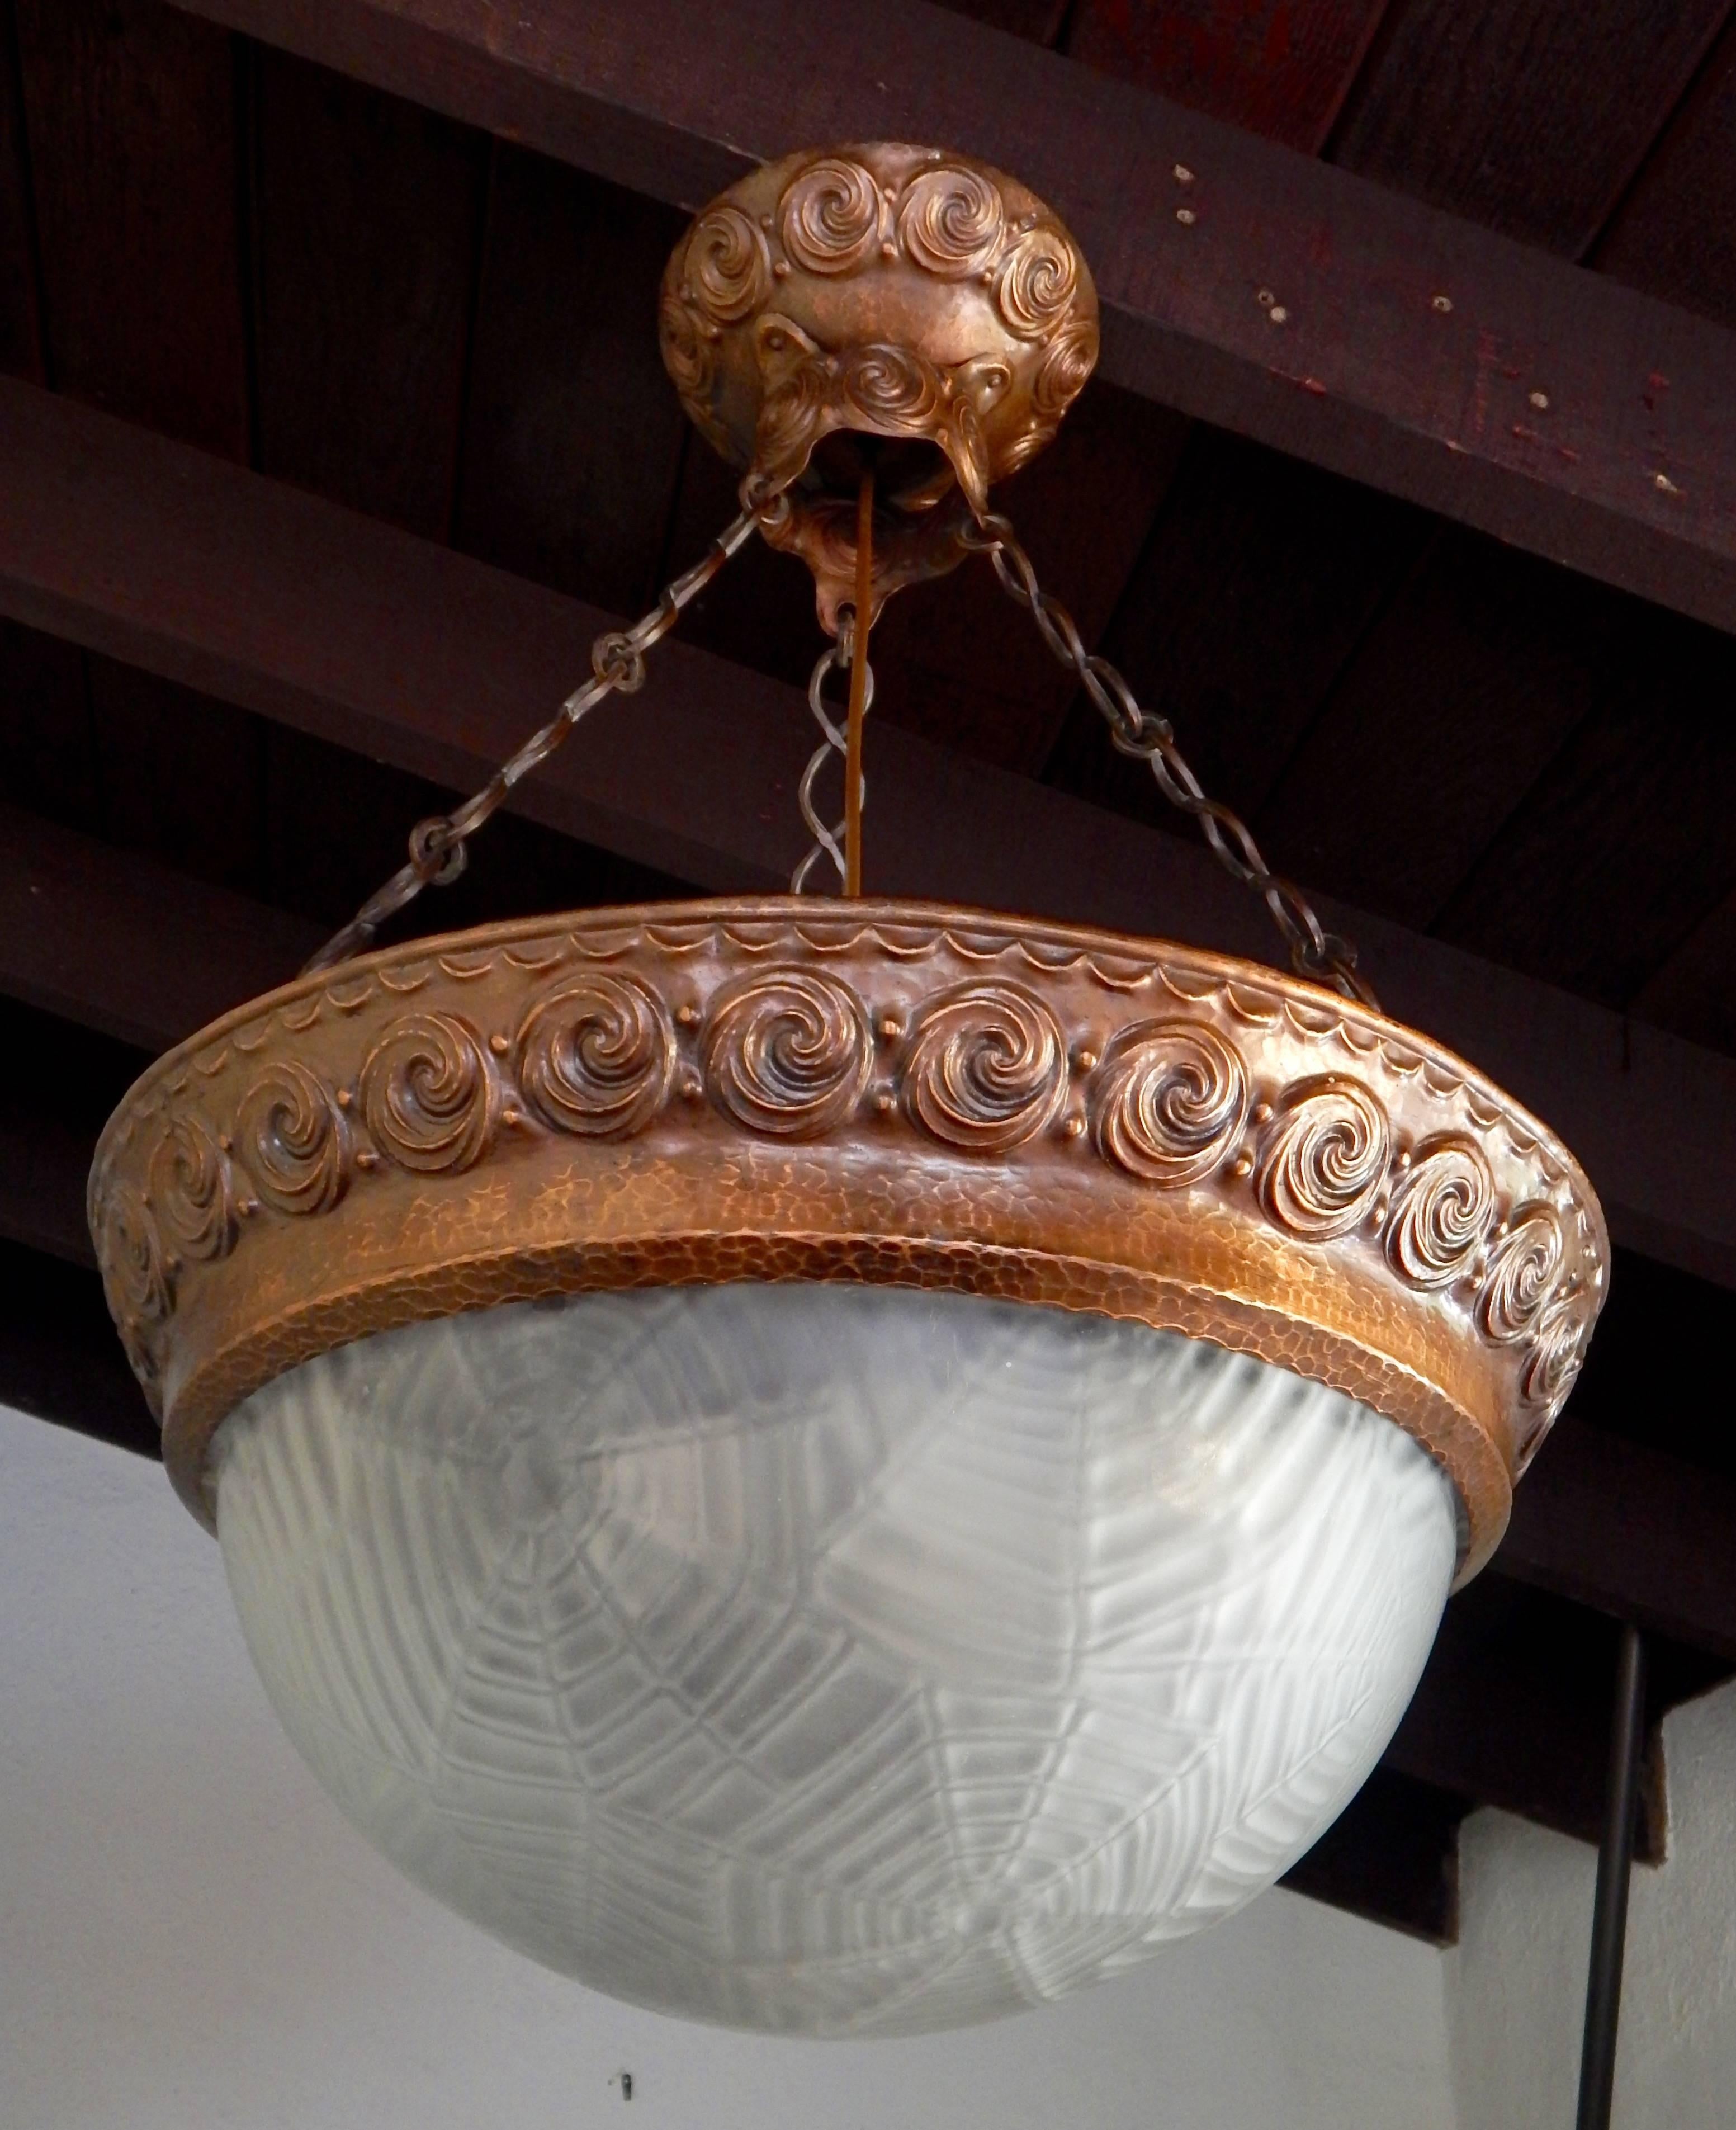 Swedish Arts and Crafts hand hammered copper hanging fixture, circa 1910. Original bowl shade in spider web pattern. Three bulb receptacles. Freshly rewired.